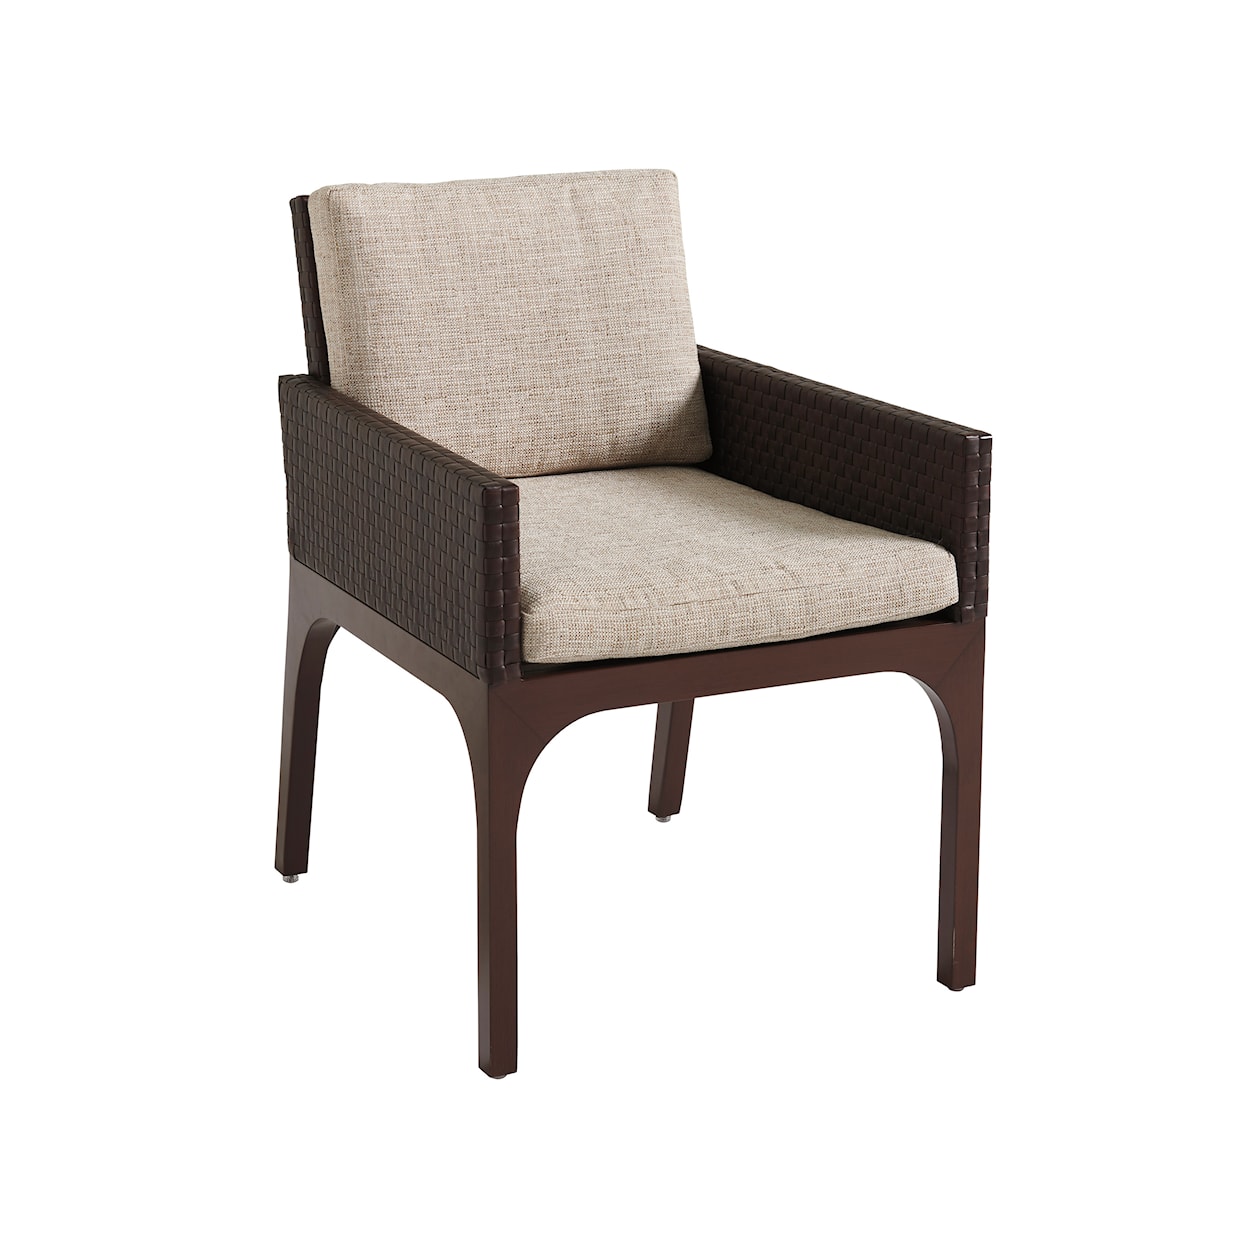 Tommy Bahama Outdoor Living Abaco Dining Arm Chair